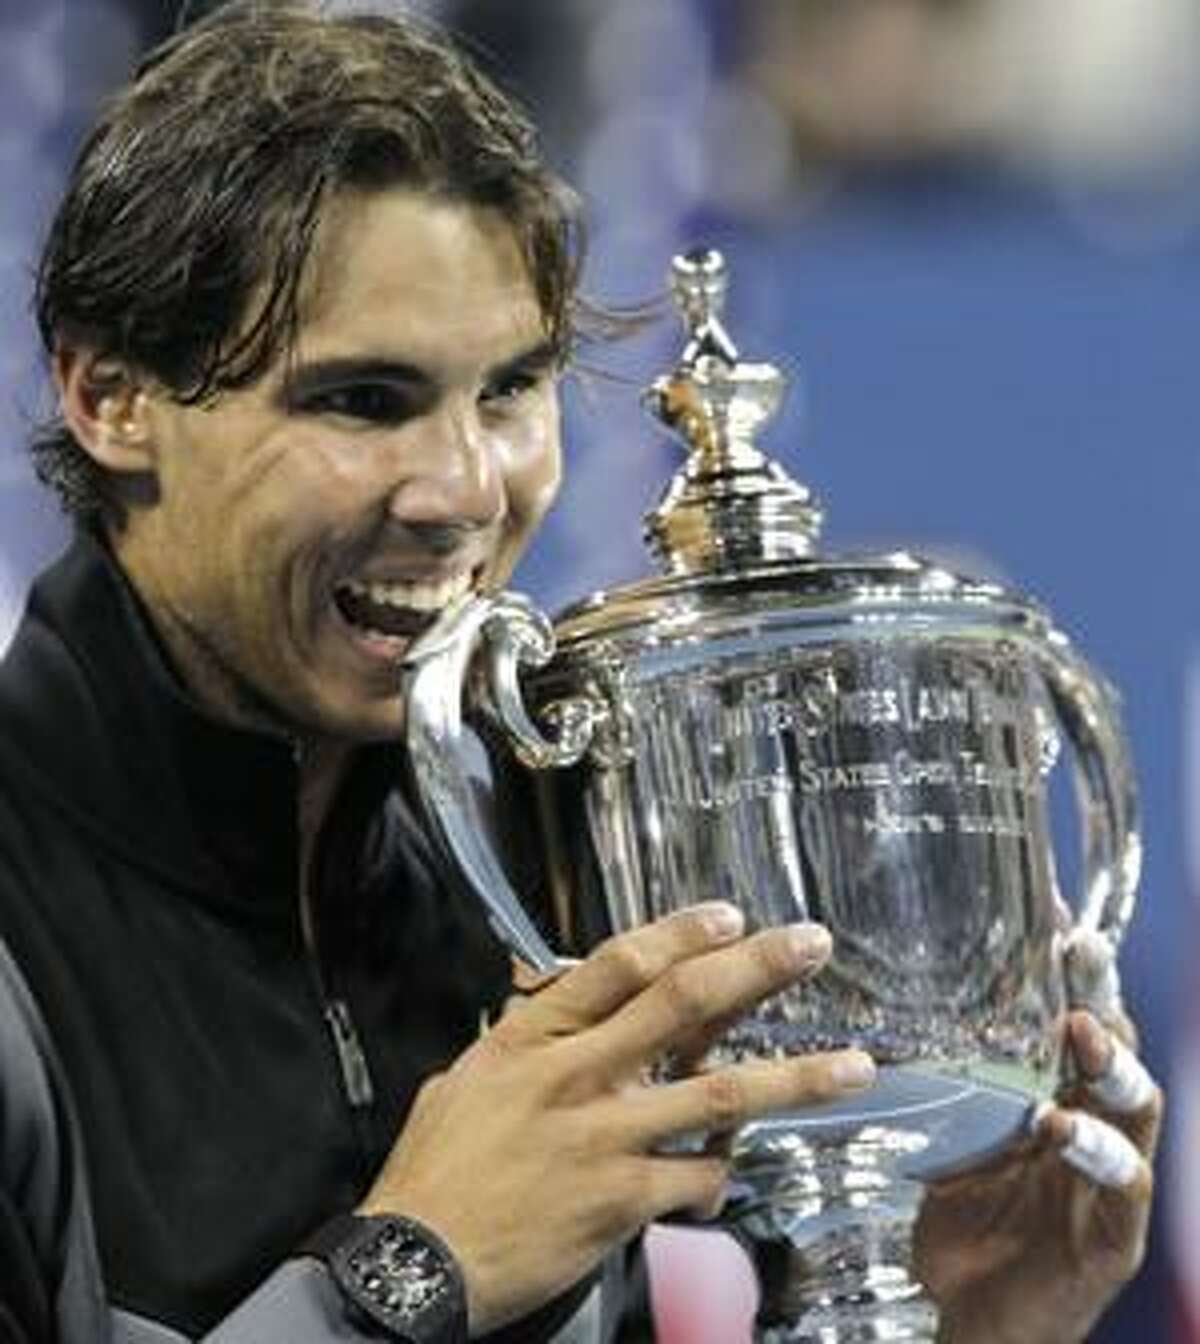 AP Rafael Nadal of Spain bites his trophy after beating Novak Djokovic of Serbia to win the men's championship match at the U.S. Open tennis tournament in New York, Monday.